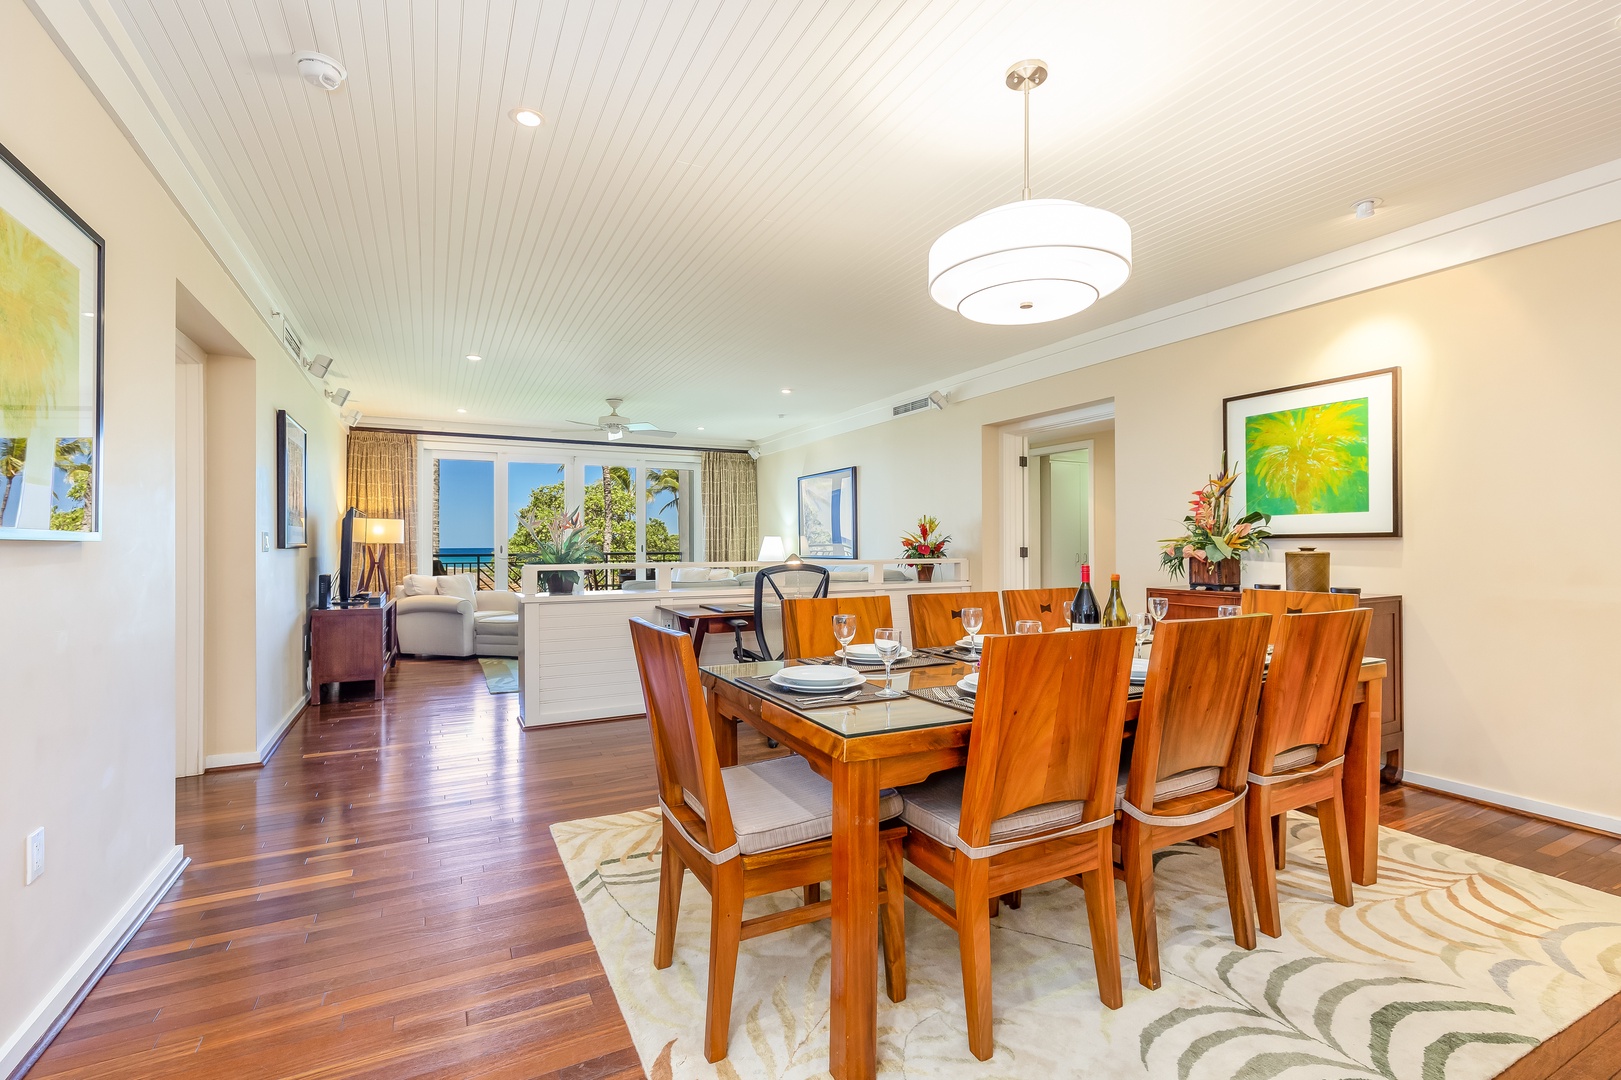 Kahuku Vacation Rentals, Turtle Bay Villas 201 - comfort in the availability in central air conditioning and complimentary wireless internet service, just in case a work-from-home day is in order.